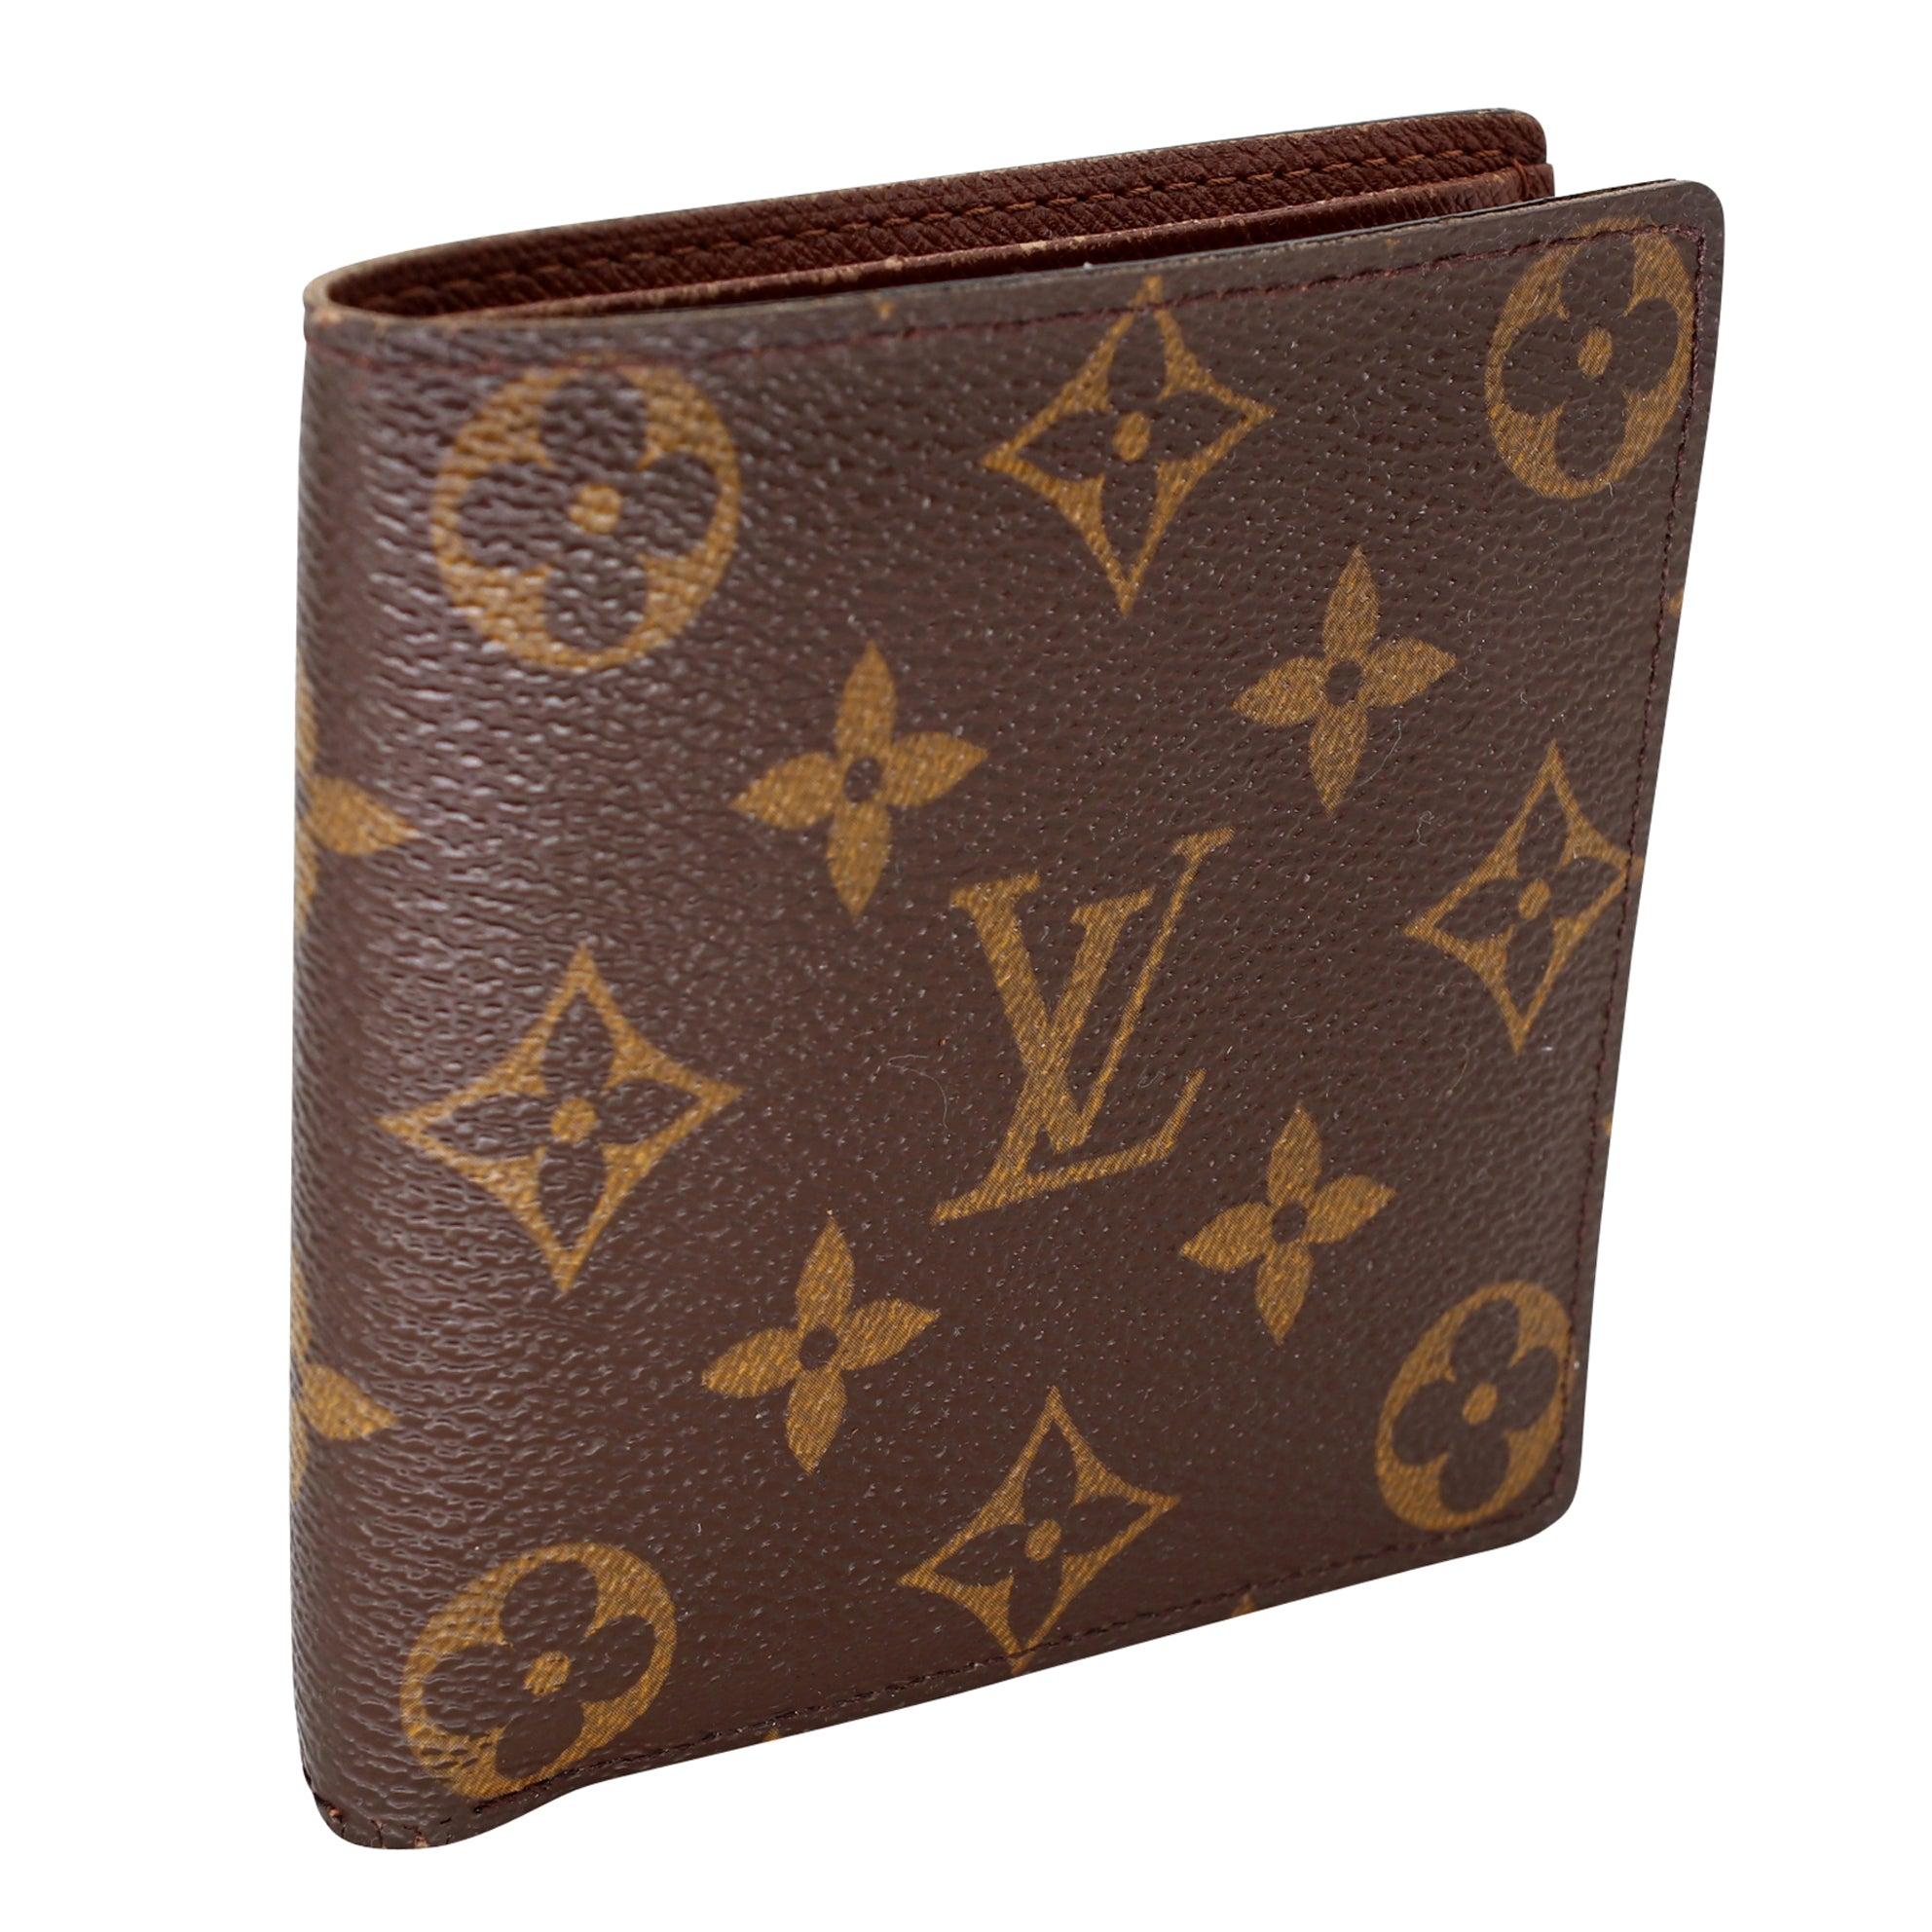 This Louis Vuitton Monogram Canvas Marco wallet is sleek and sophisticated. This wallet includes signature LV monogram canvas. Includes independent snapped pocket to keep change. It also features three credit card slots and two long bill